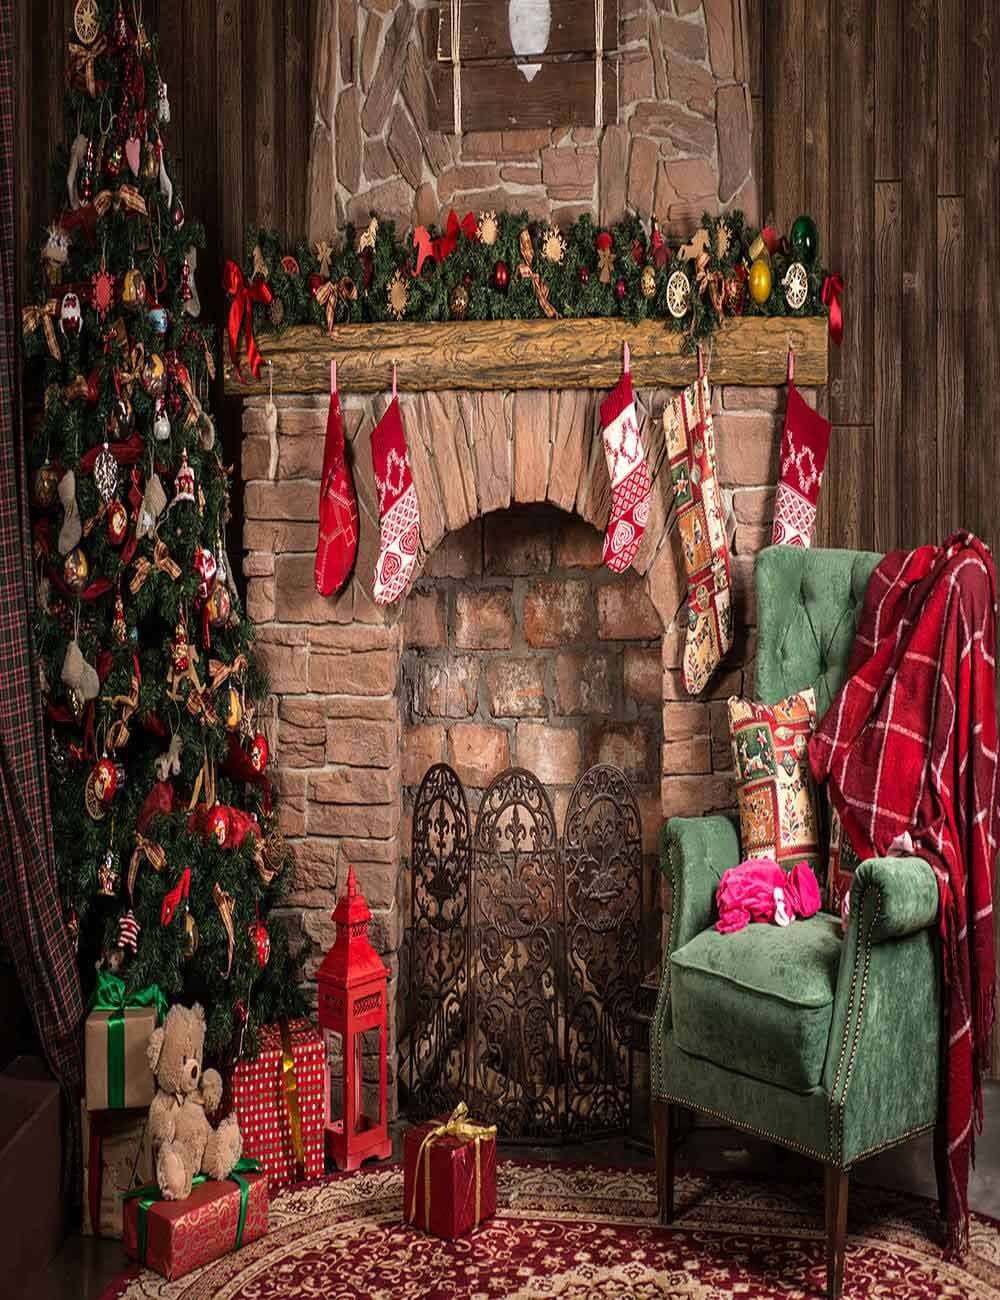 Christmas Interior Decorated With Green Chair Photography Backdrop J-0803 Shopbackdrop